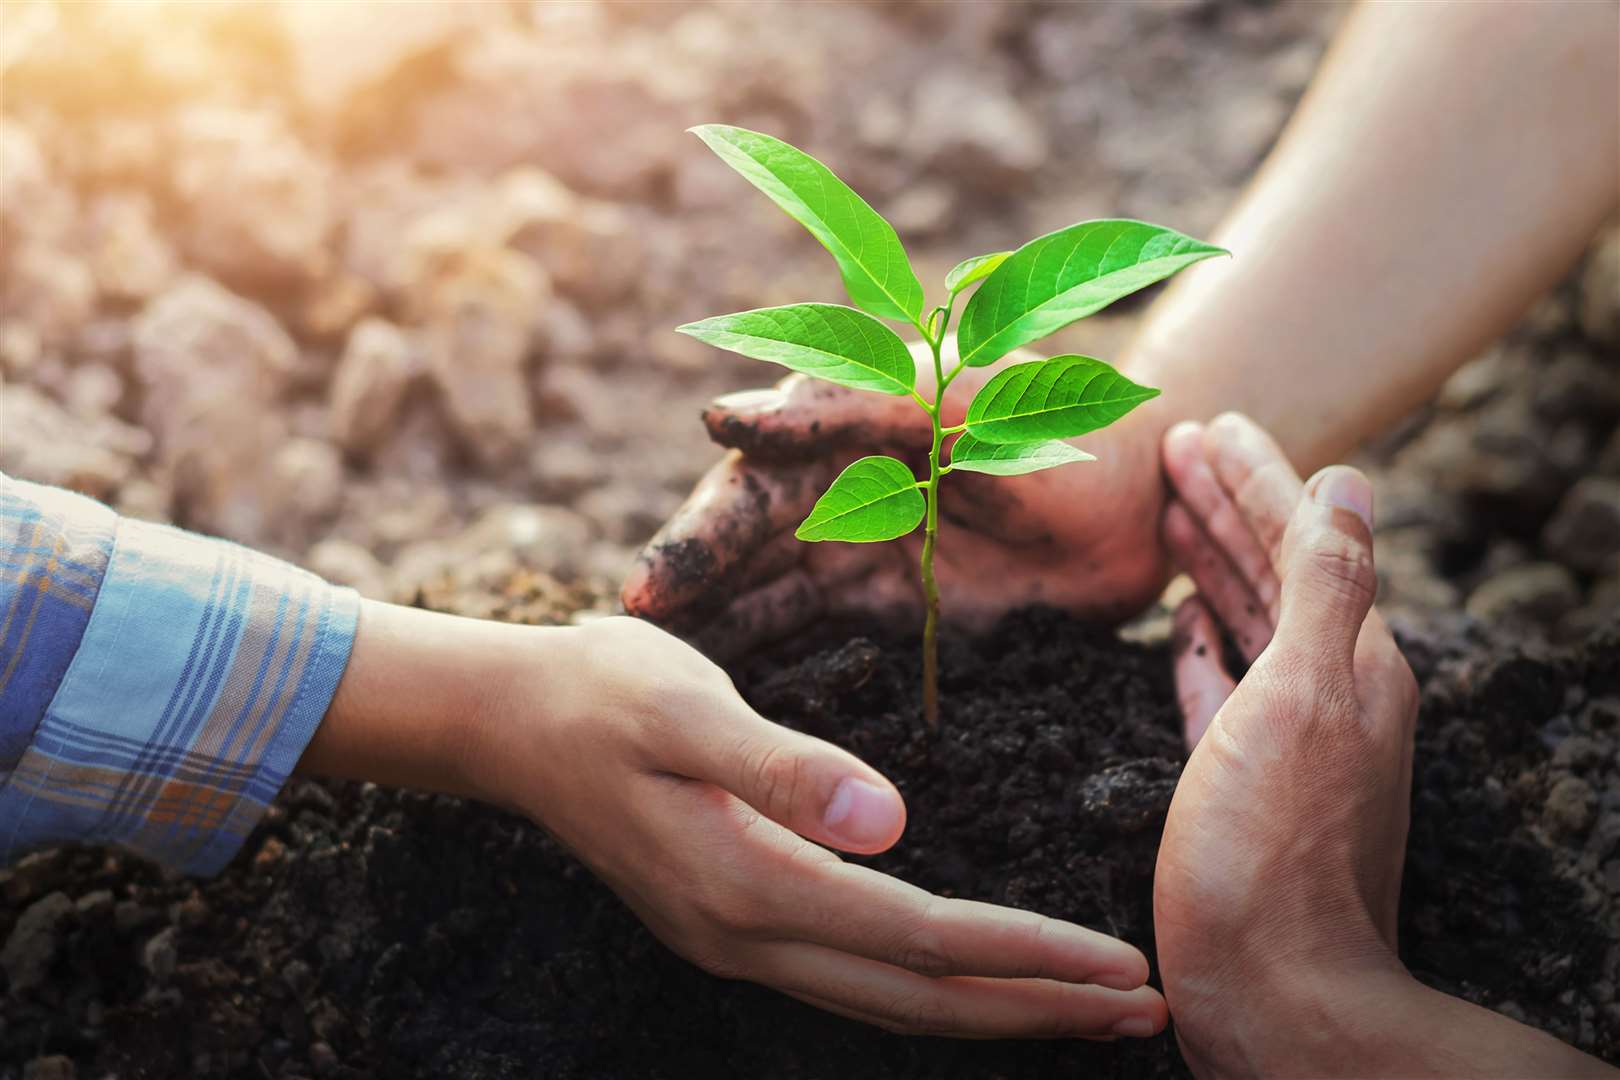 Office Angels has smashed its target of planting 2021 trees by the end of 2021 in a collaboration with Trees For Life.